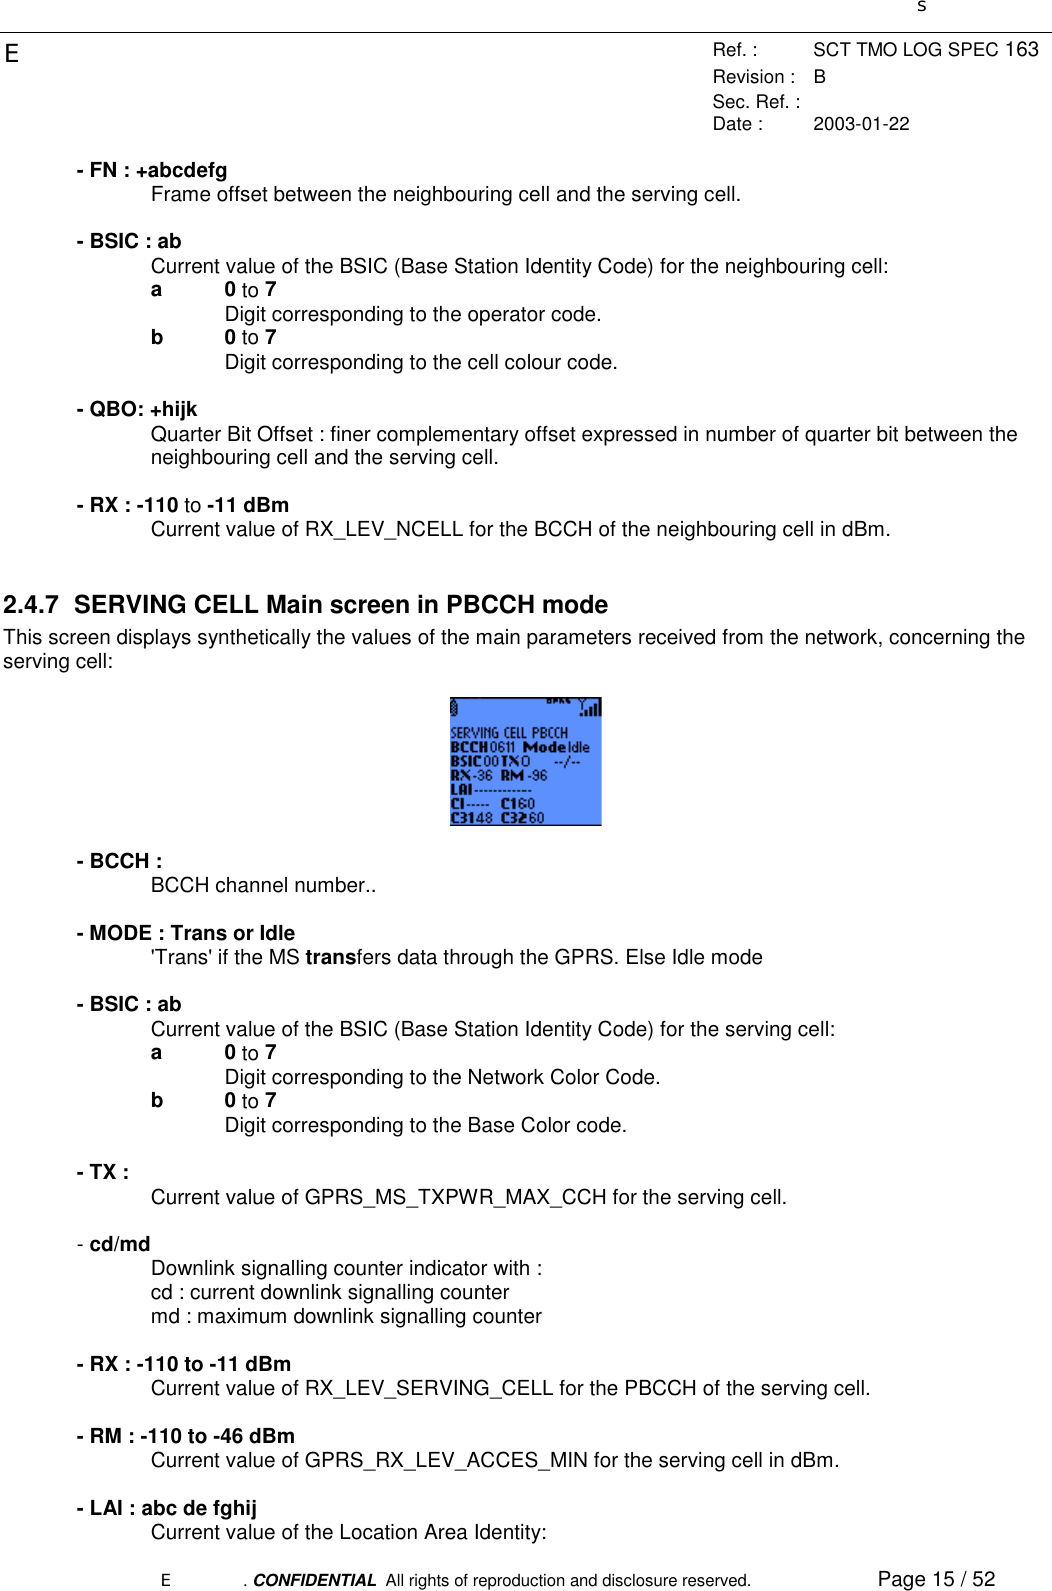 sERef. : SCT TMO LOG SPEC 163Revision : BSec. Ref. :Date : 2003-01-22E. CONFIDENTIAL  All rights of reproduction and disclosure reserved. Page 15 / 52- FN : +abcdefgFrame offset between the neighbouring cell and the serving cell.- BSIC : abCurrent value of the BSIC (Base Station Identity Code) for the neighbouring cell:a0 to 7Digit corresponding to the operator code.b0 to 7Digit corresponding to the cell colour code.- QBO: +hijkQuarter Bit Offset : finer complementary offset expressed in number of quarter bit between theneighbouring cell and the serving cell.- RX : -110 to -11 dBmCurrent value of RX_LEV_NCELL for the BCCH of the neighbouring cell in dBm.2.4.7  SERVING CELL Main screen in PBCCH modeThis screen displays synthetically the values of the main parameters received from the network, concerning theserving cell:- BCCH :BCCH channel number..- MODE : Trans or Idle&apos;Trans&apos; if the MS transfers data through the GPRS. Else Idle mode- BSIC : abCurrent value of the BSIC (Base Station Identity Code) for the serving cell:a0 to 7Digit corresponding to the Network Color Code.b0 to 7Digit corresponding to the Base Color code.- TX : Current value of GPRS_MS_TXPWR_MAX_CCH for the serving cell.- cd/mdDownlink signalling counter indicator with :cd : current downlink signalling countermd : maximum downlink signalling counter- RX : -110 to -11 dBmCurrent value of RX_LEV_SERVING_CELL for the PBCCH of the serving cell.- RM : -110 to -46 dBmCurrent value of GPRS_RX_LEV_ACCES_MIN for the serving cell in dBm.- LAI : abc de fghijCurrent value of the Location Area Identity: